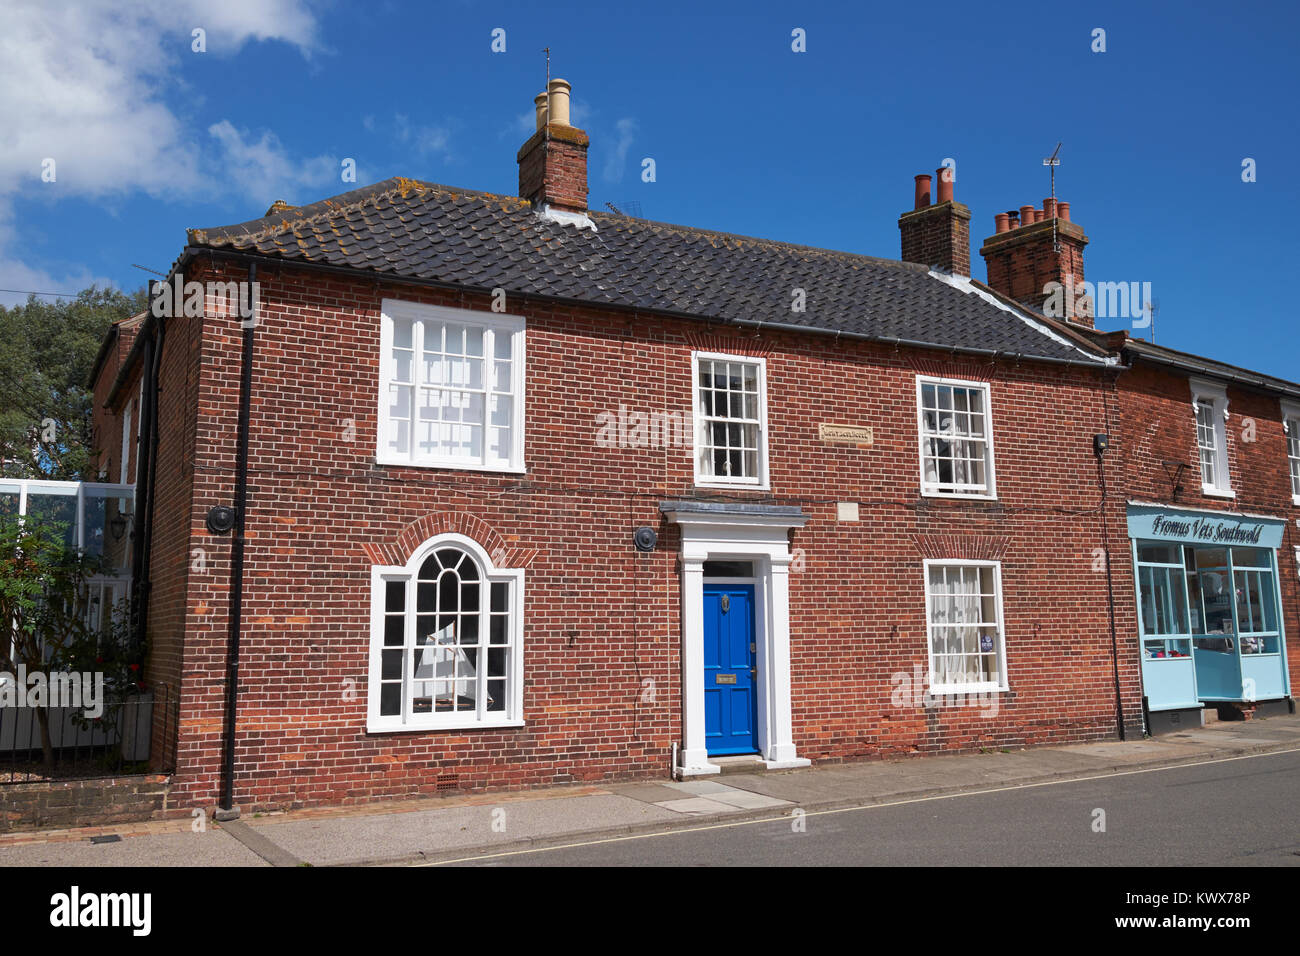 Montague House, High Street, Southwold, Suffolk, was the family home of the author George Orwell (Eric Blair) in the 1930s. Stock Photo